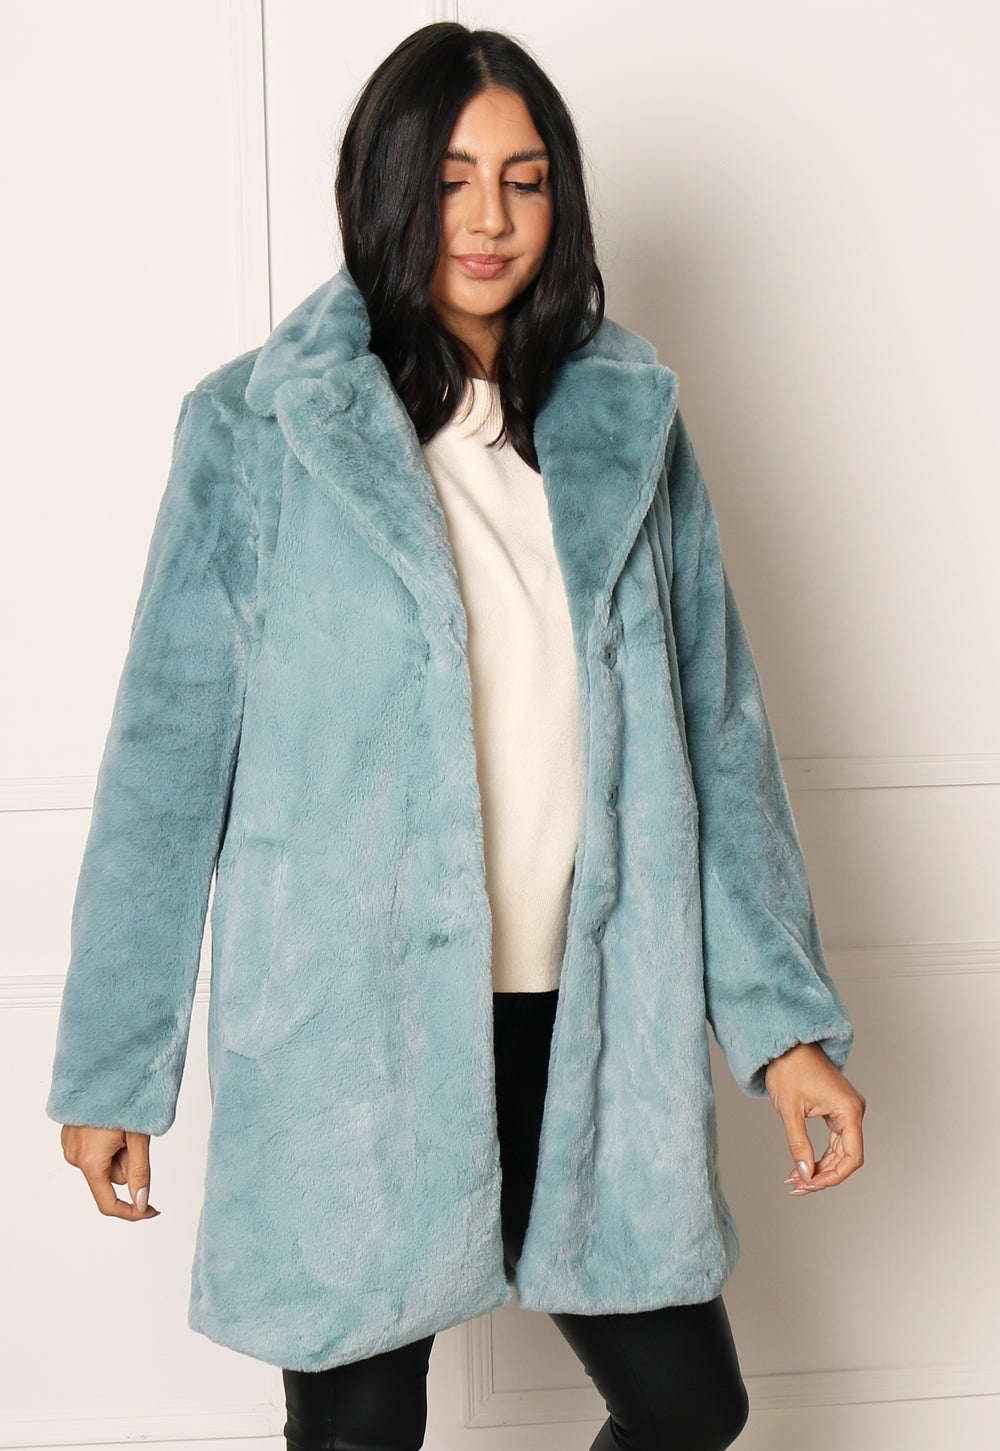 VILA Ebba Vintage Style Faux Fur Midi Coat with Collar in Duck Egg Blue - One Nation Clothing